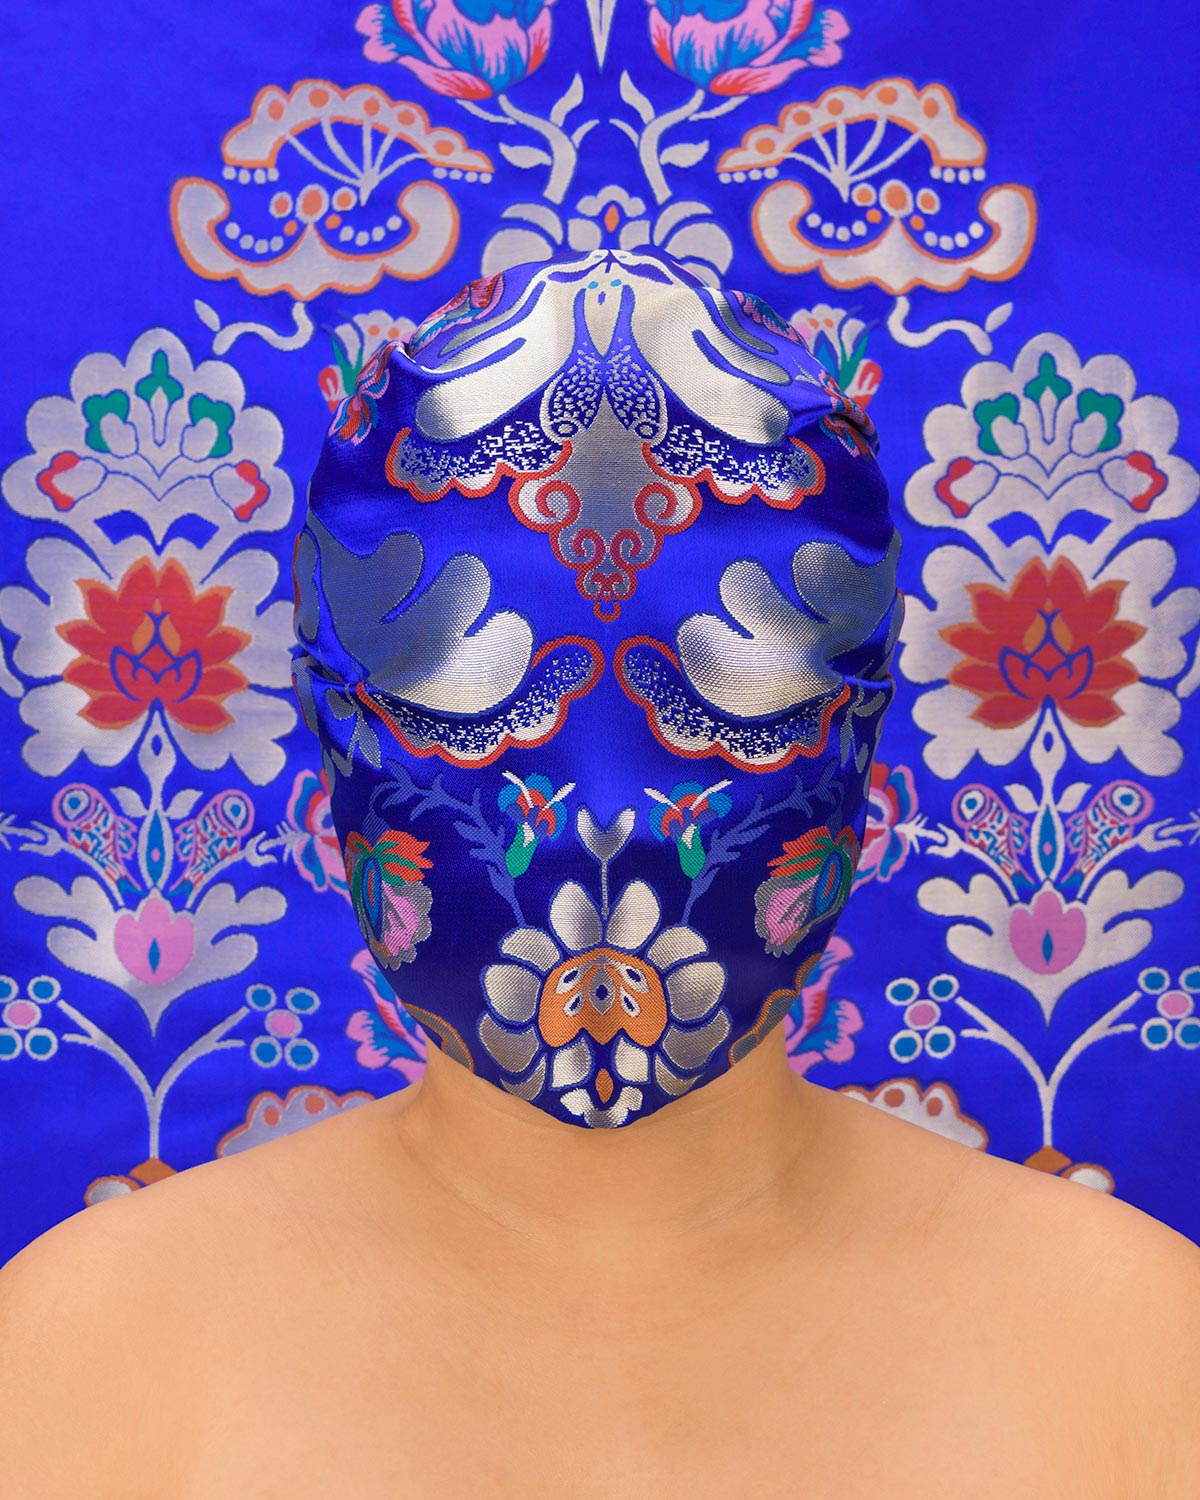 Chun Hua Catherine Dong masks her face with beautiful fabric to make shame visible